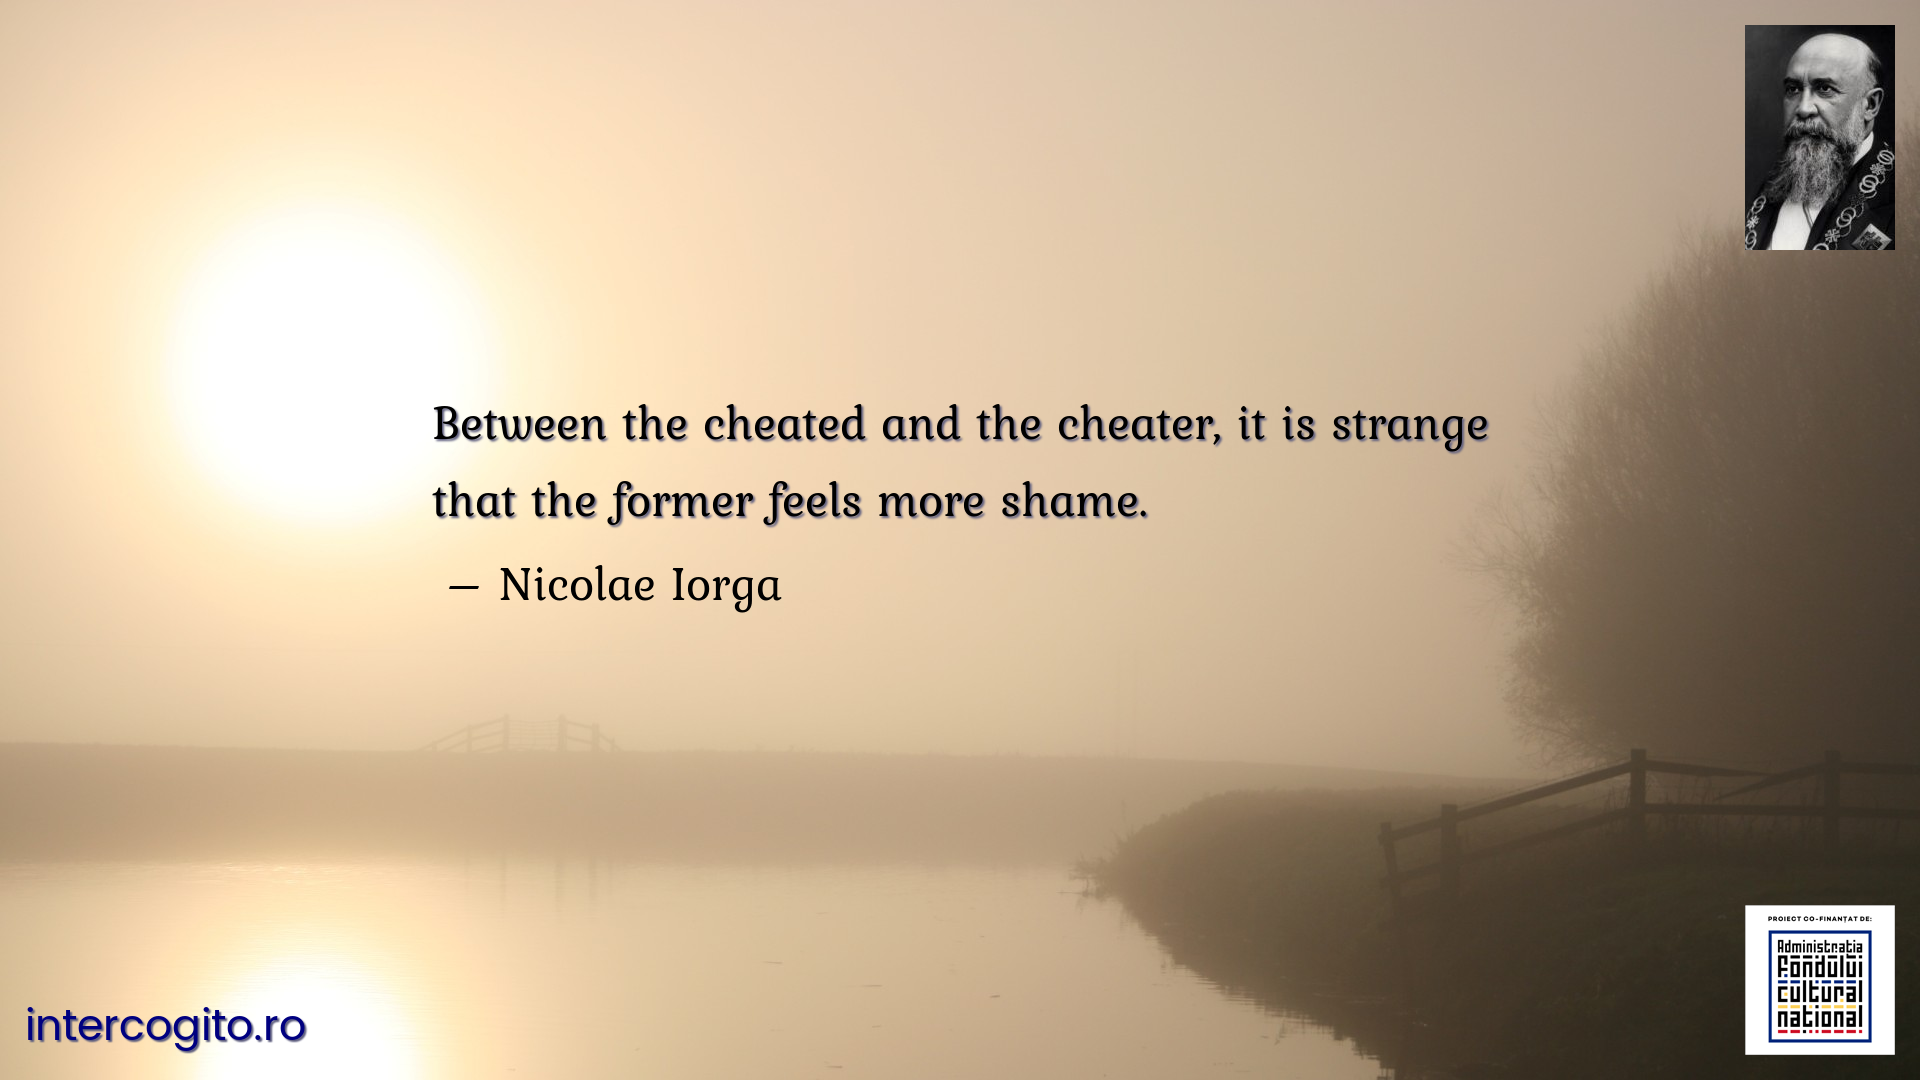 Between the cheated and the cheater, it is strange that the former feels more shame.